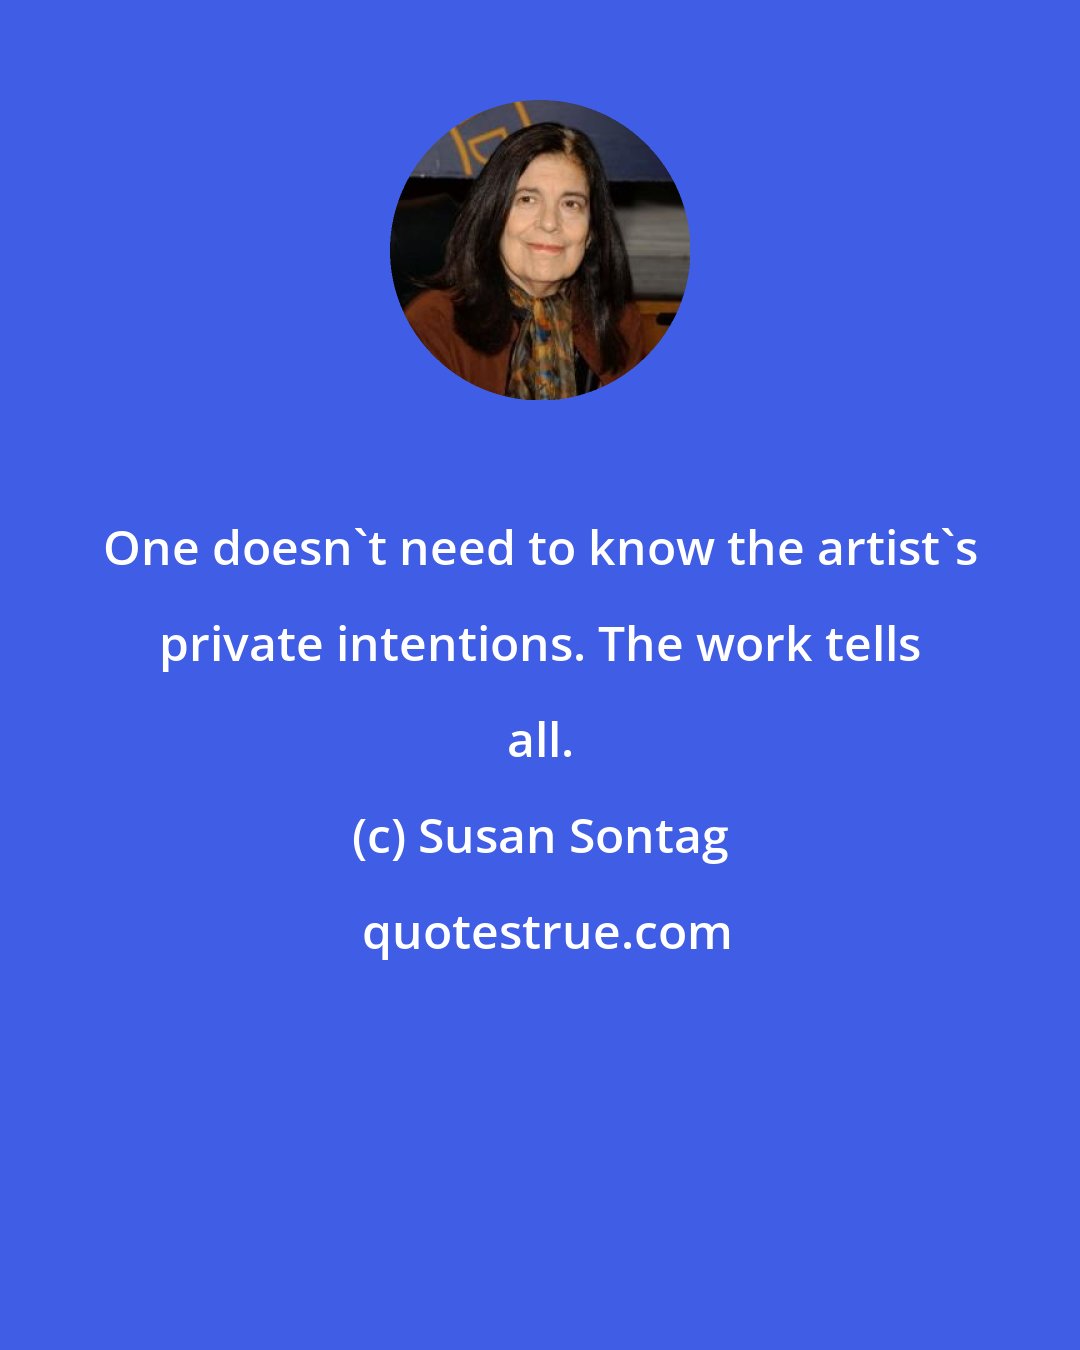 Susan Sontag: One doesn't need to know the artist's private intentions. The work tells all.